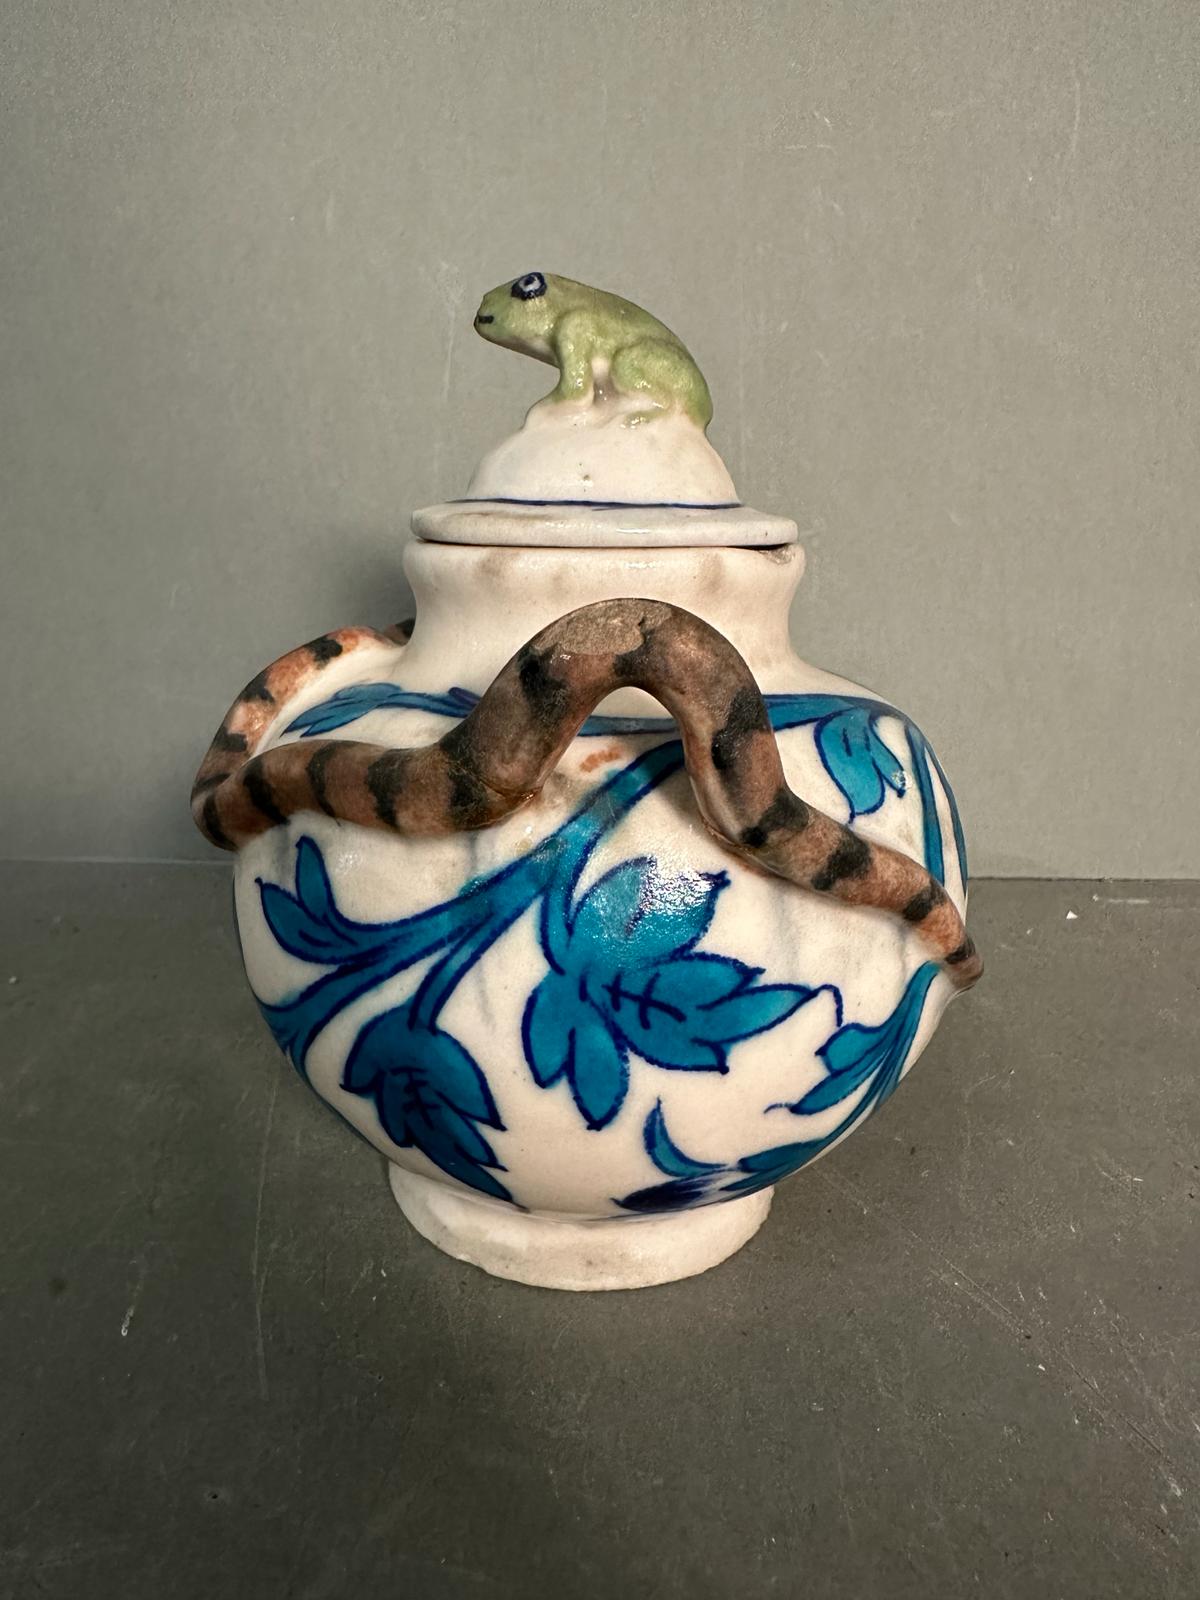 A small Chinese style teapot with a blue leaf design, snake handle and a decorative frog finial to - Image 2 of 4